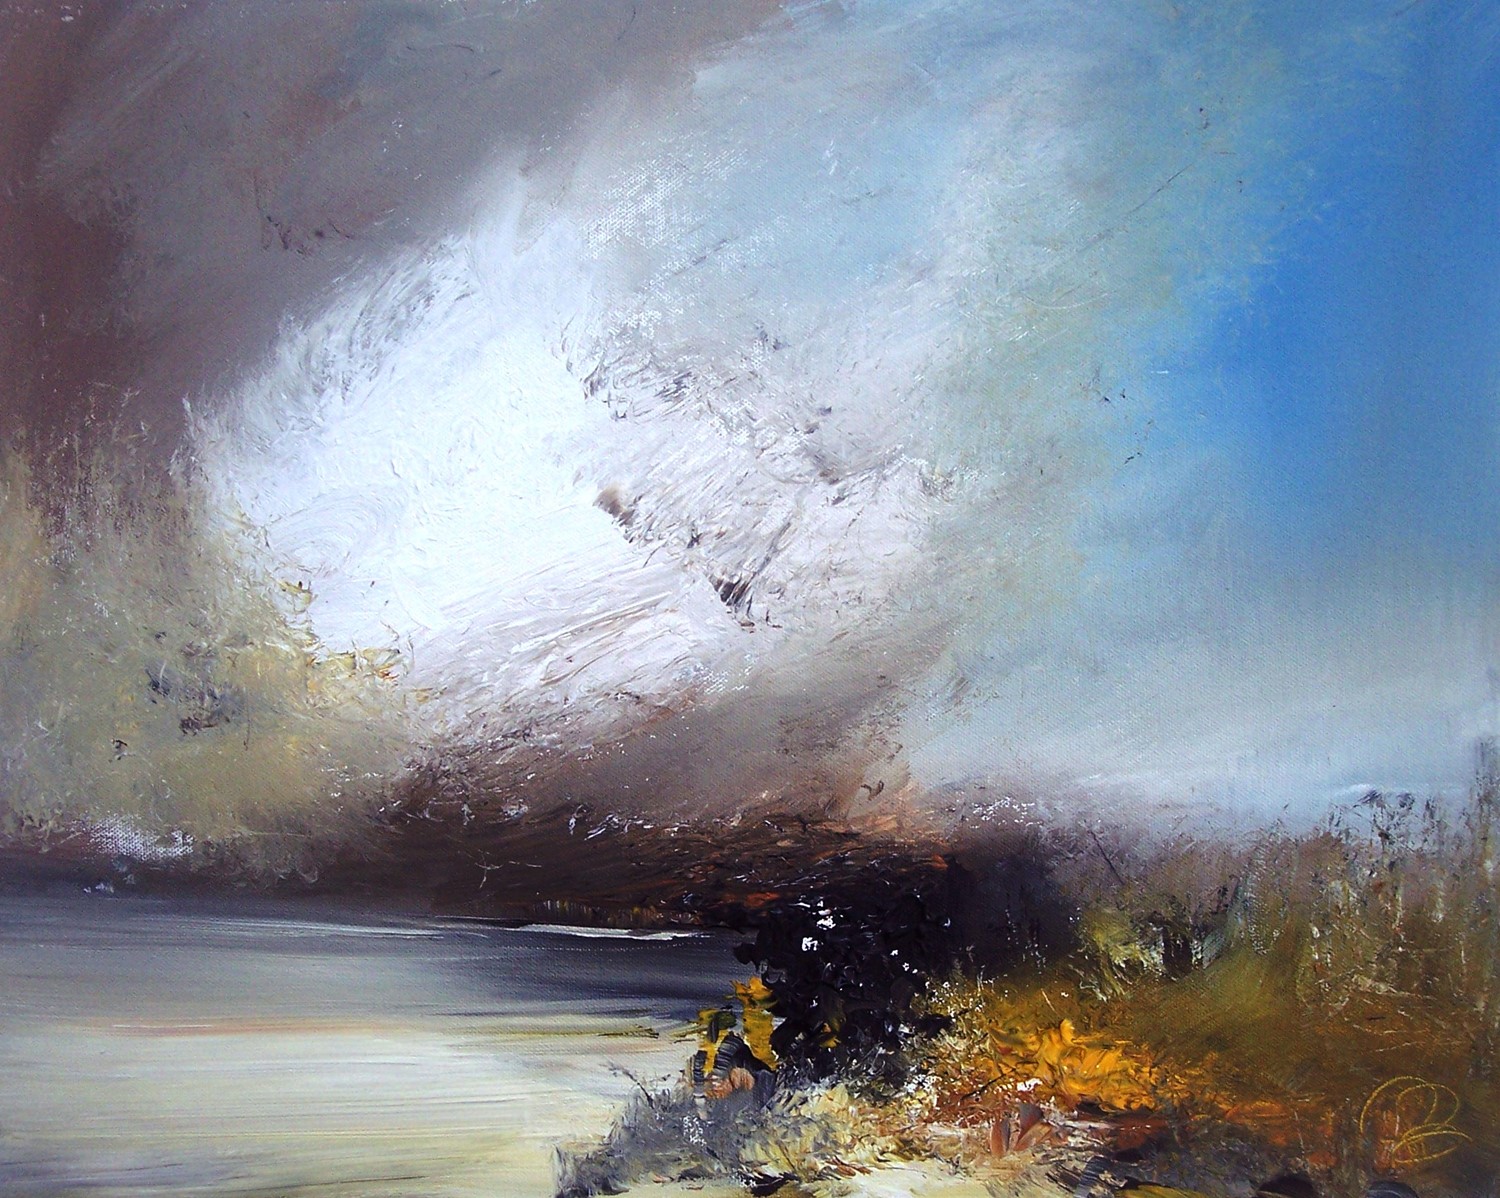 'Swelling Clouds' by artist Rosanne Barr